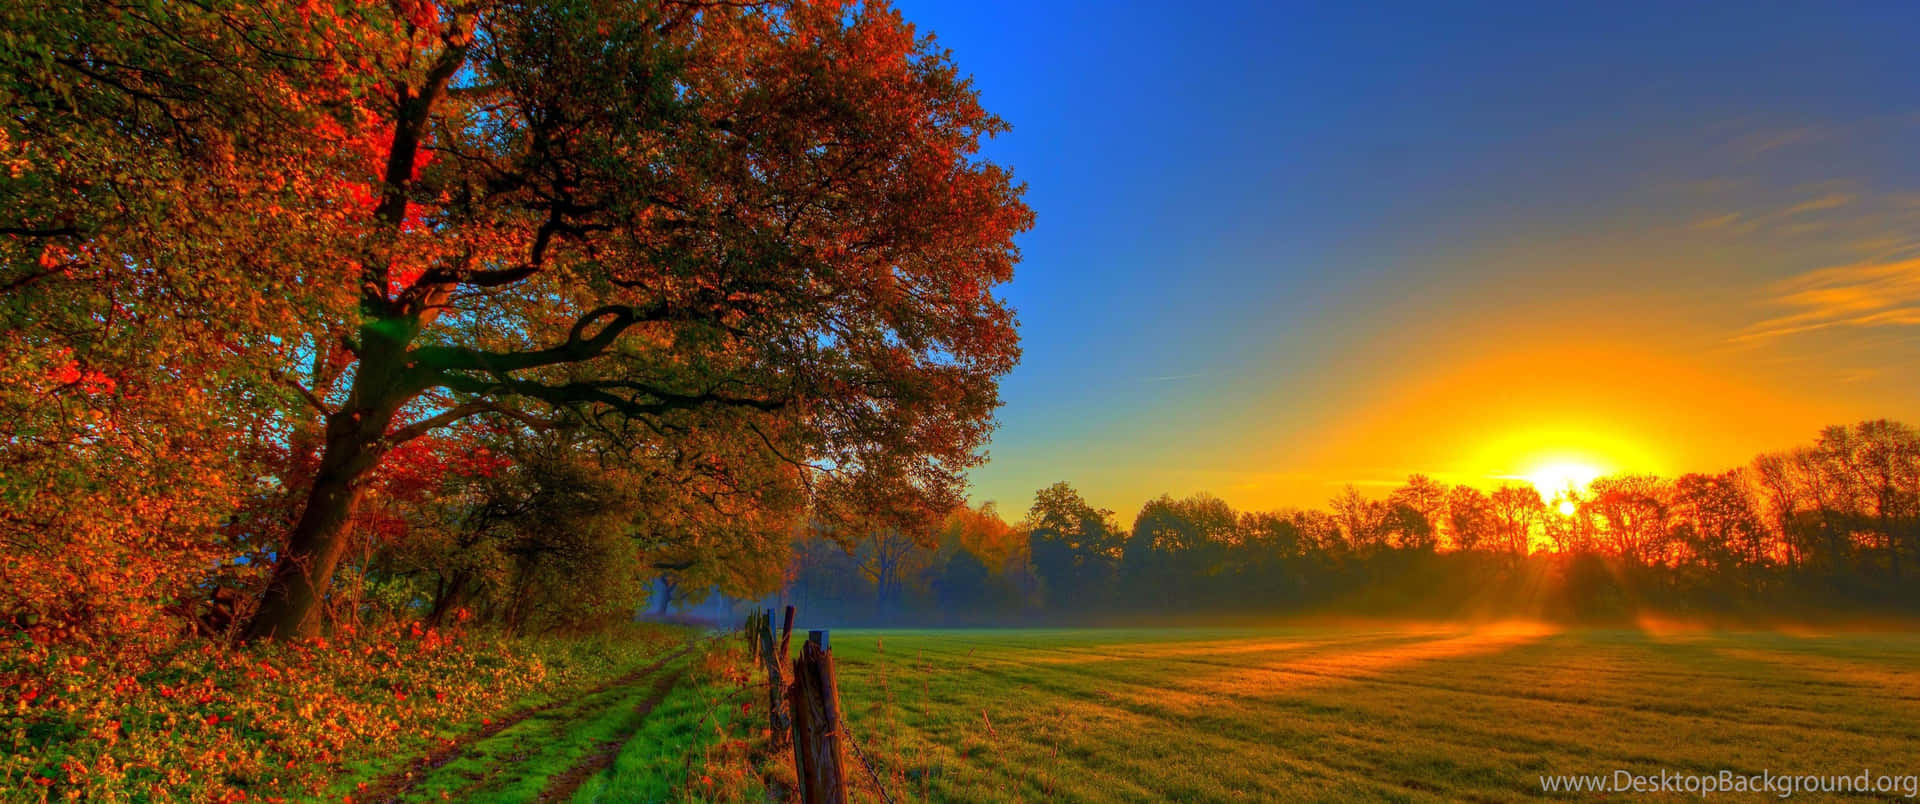 3440x1440 Fall Season Trees In Field With Sunset Wallpaper